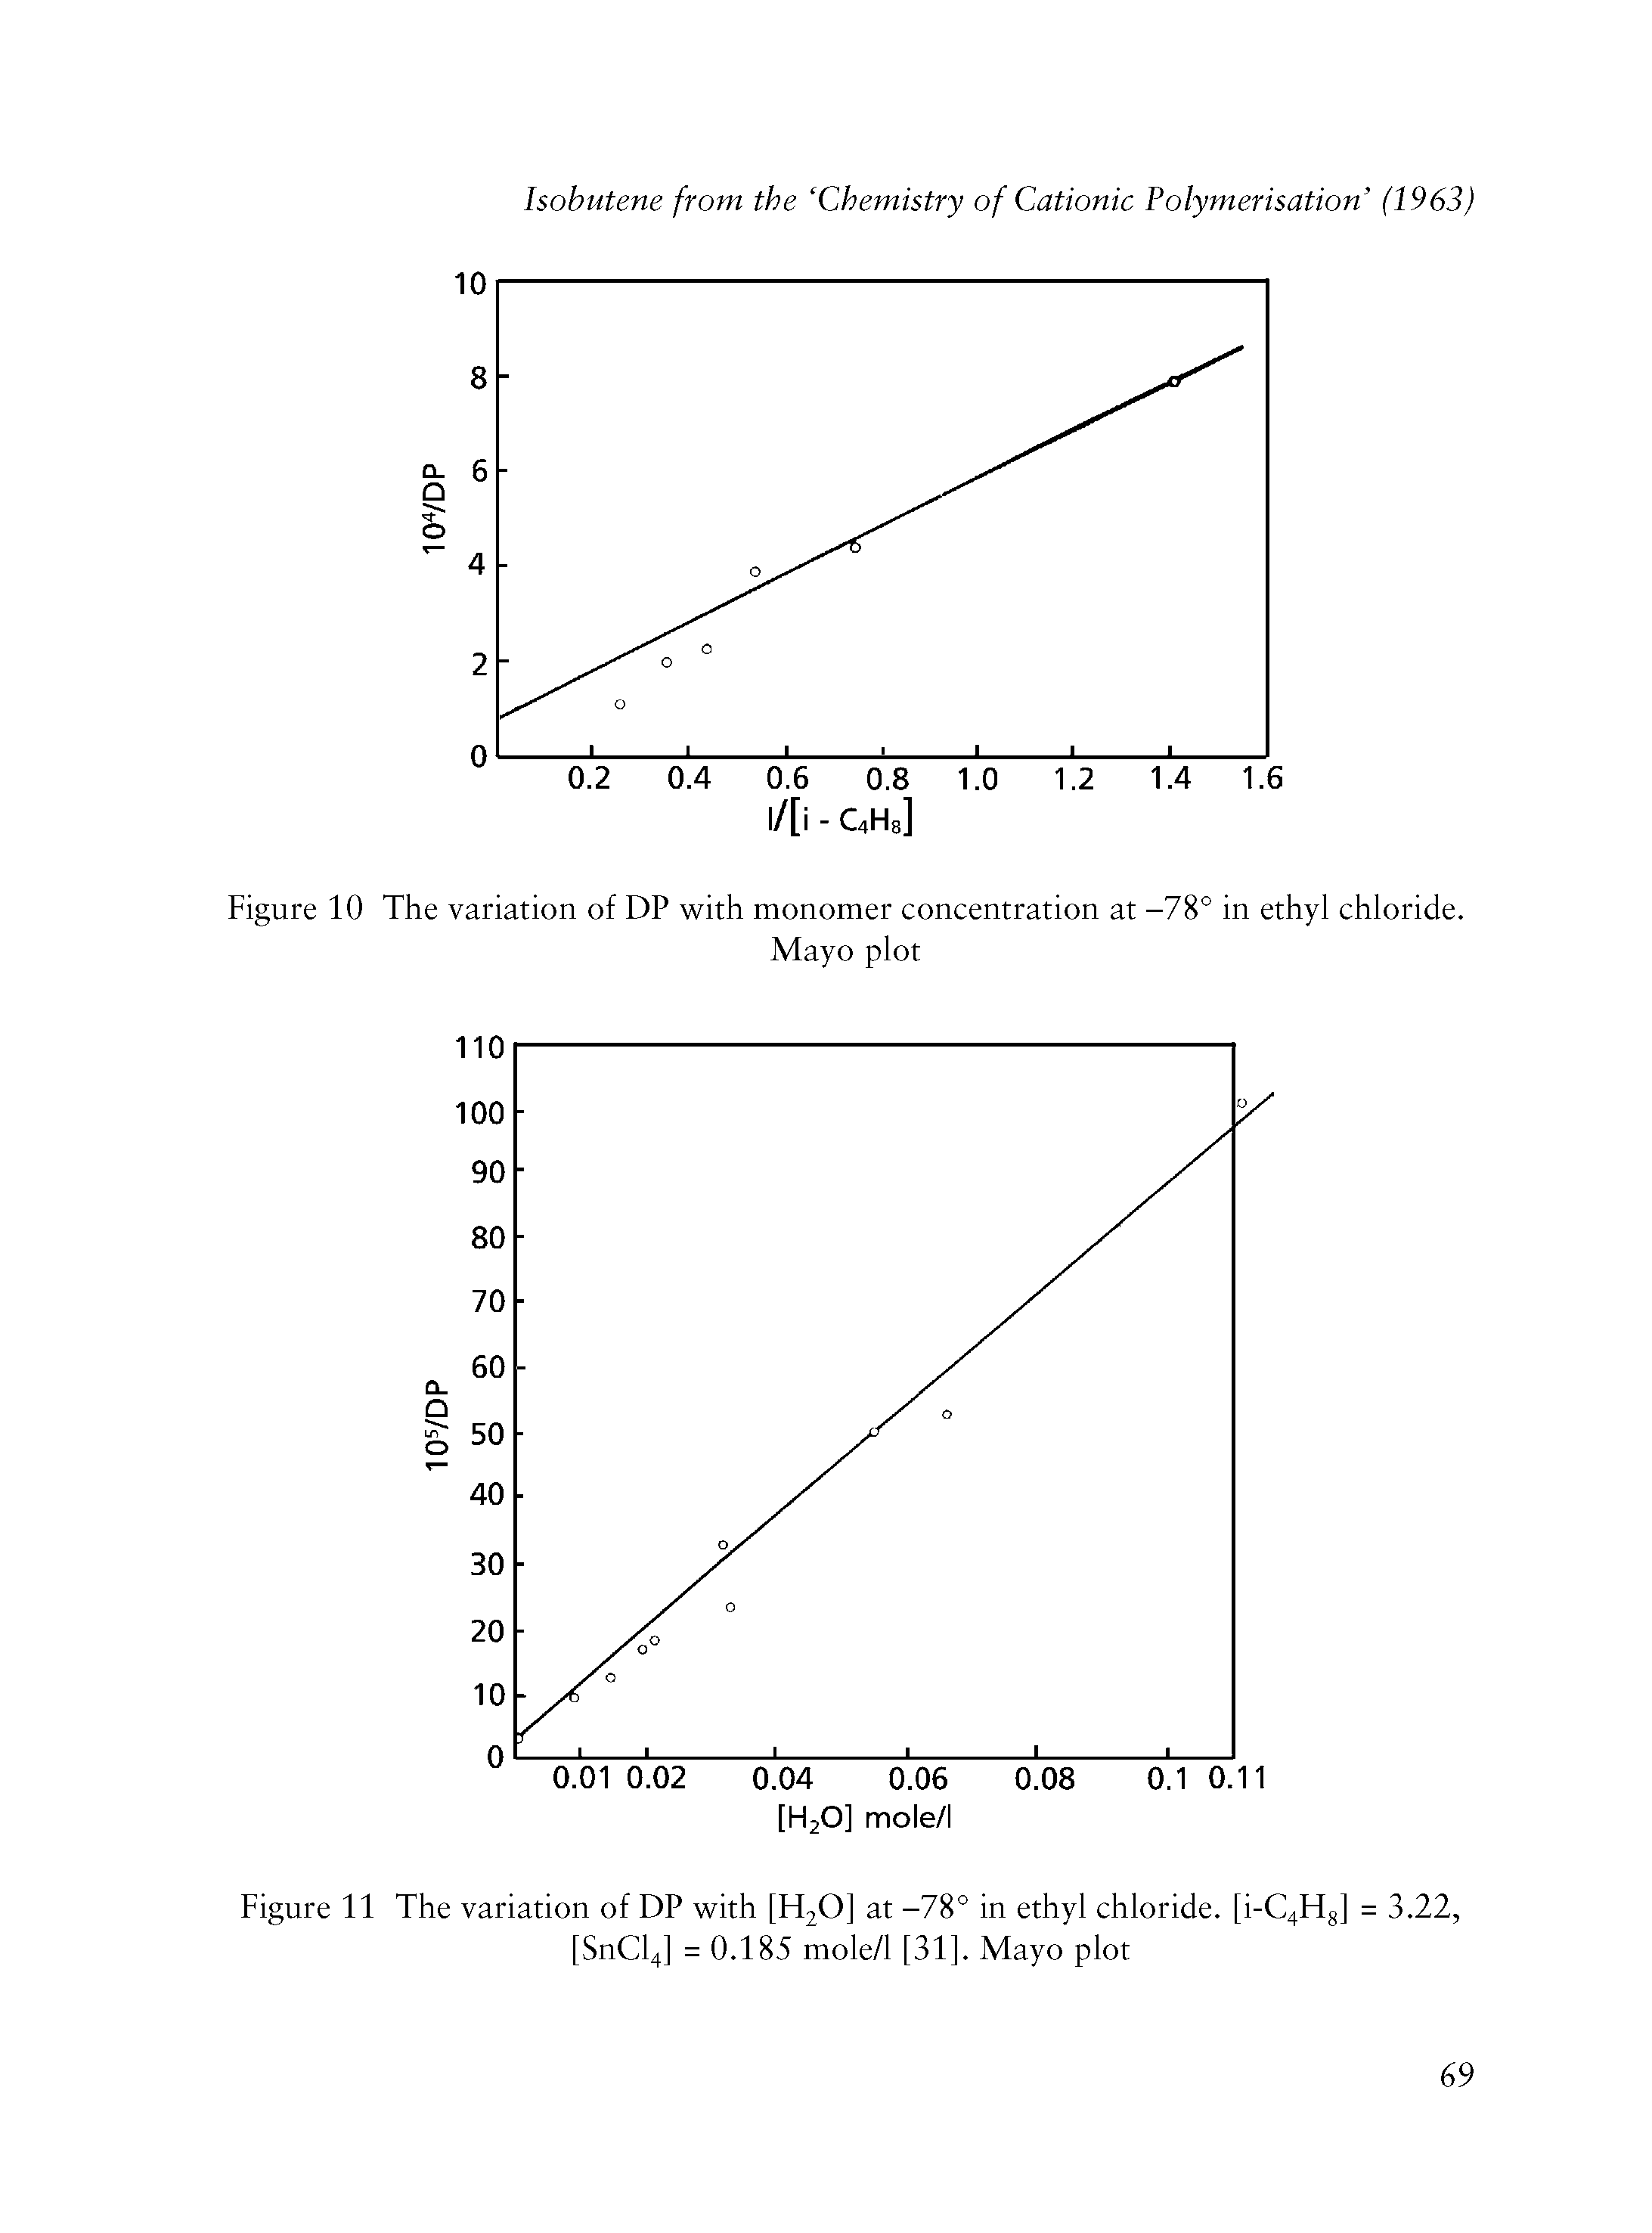 Figure 11 The variation of DP with [H20] at -78° in ethyl chloride. [i-C4H8] = 3.22, [SnCl4] = 0.185 mole/l [31]. Mayo plot...